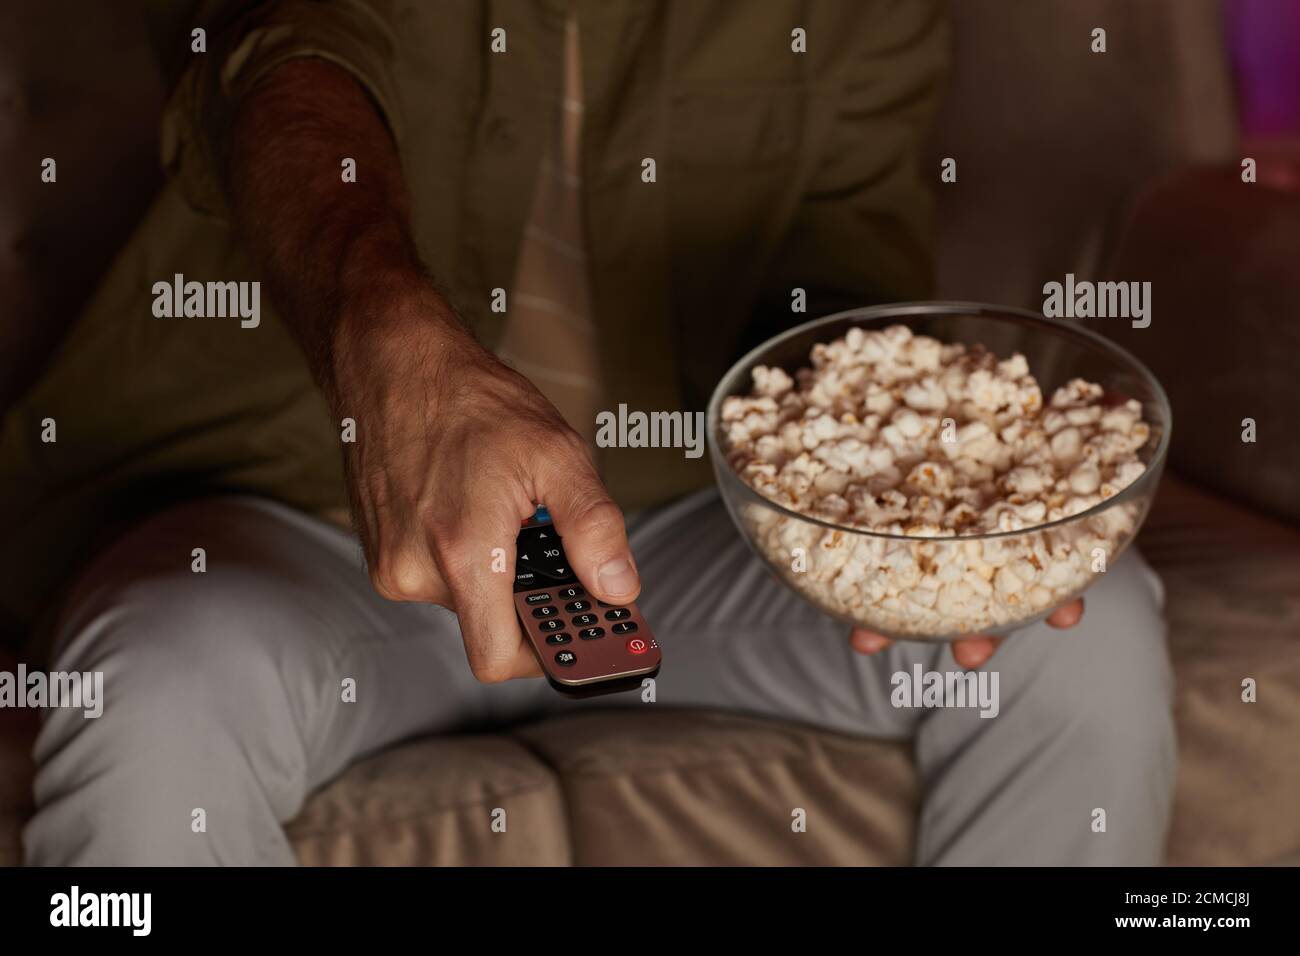 Close-up of man changing channels on TV while watching TV and eating popcorn Stock Photo